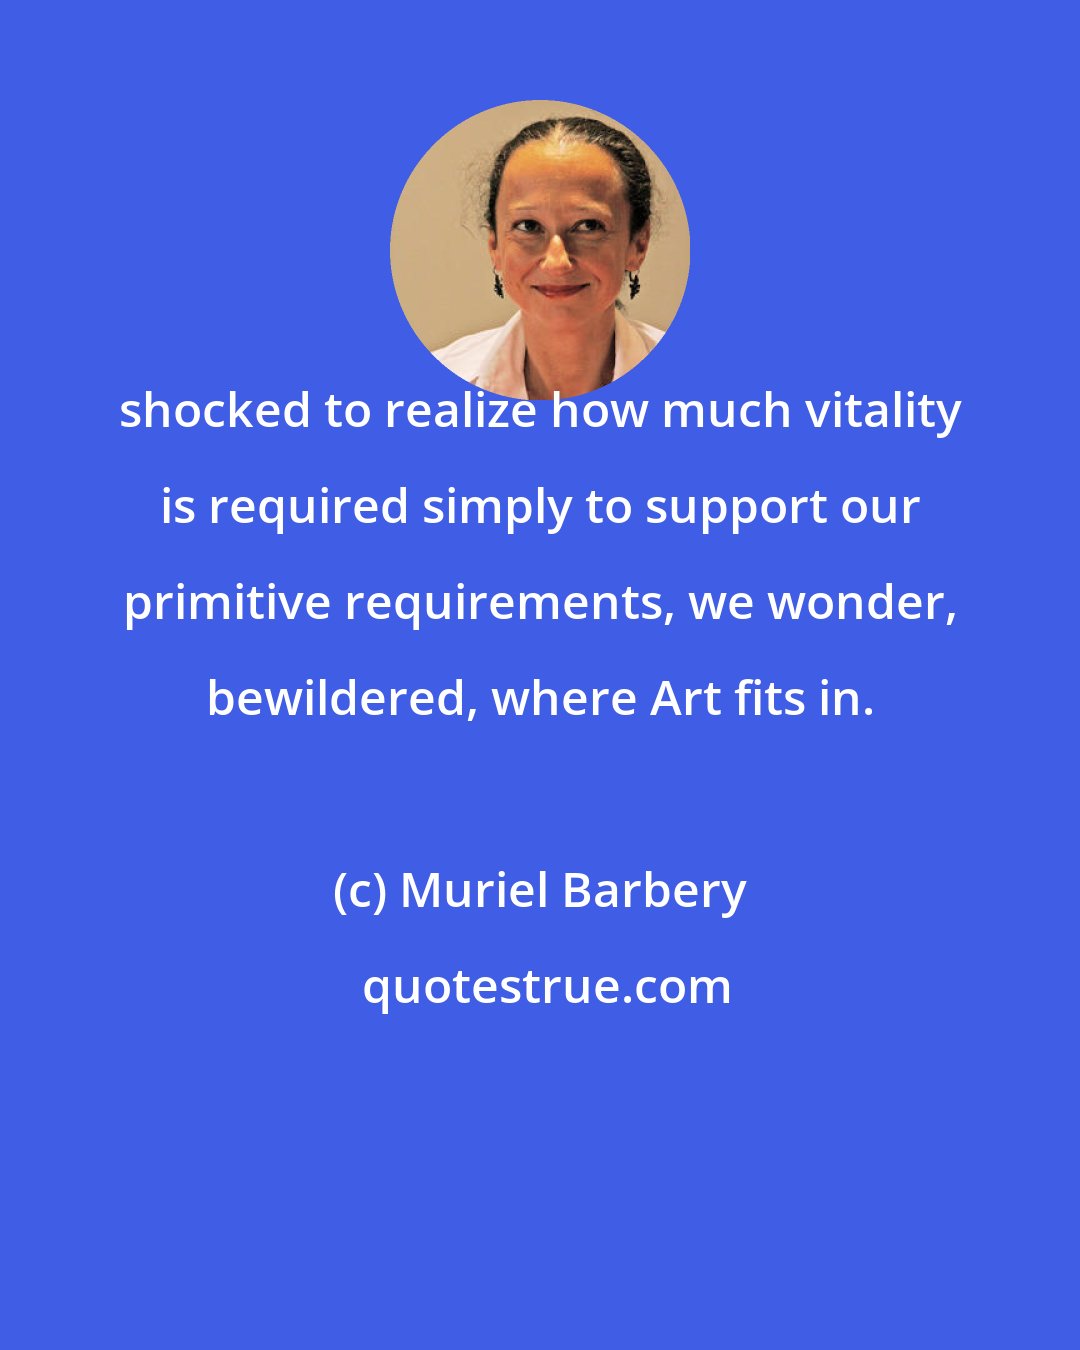 Muriel Barbery: shocked to realize how much vitality is required simply to support our primitive requirements, we wonder, bewildered, where Art fits in.